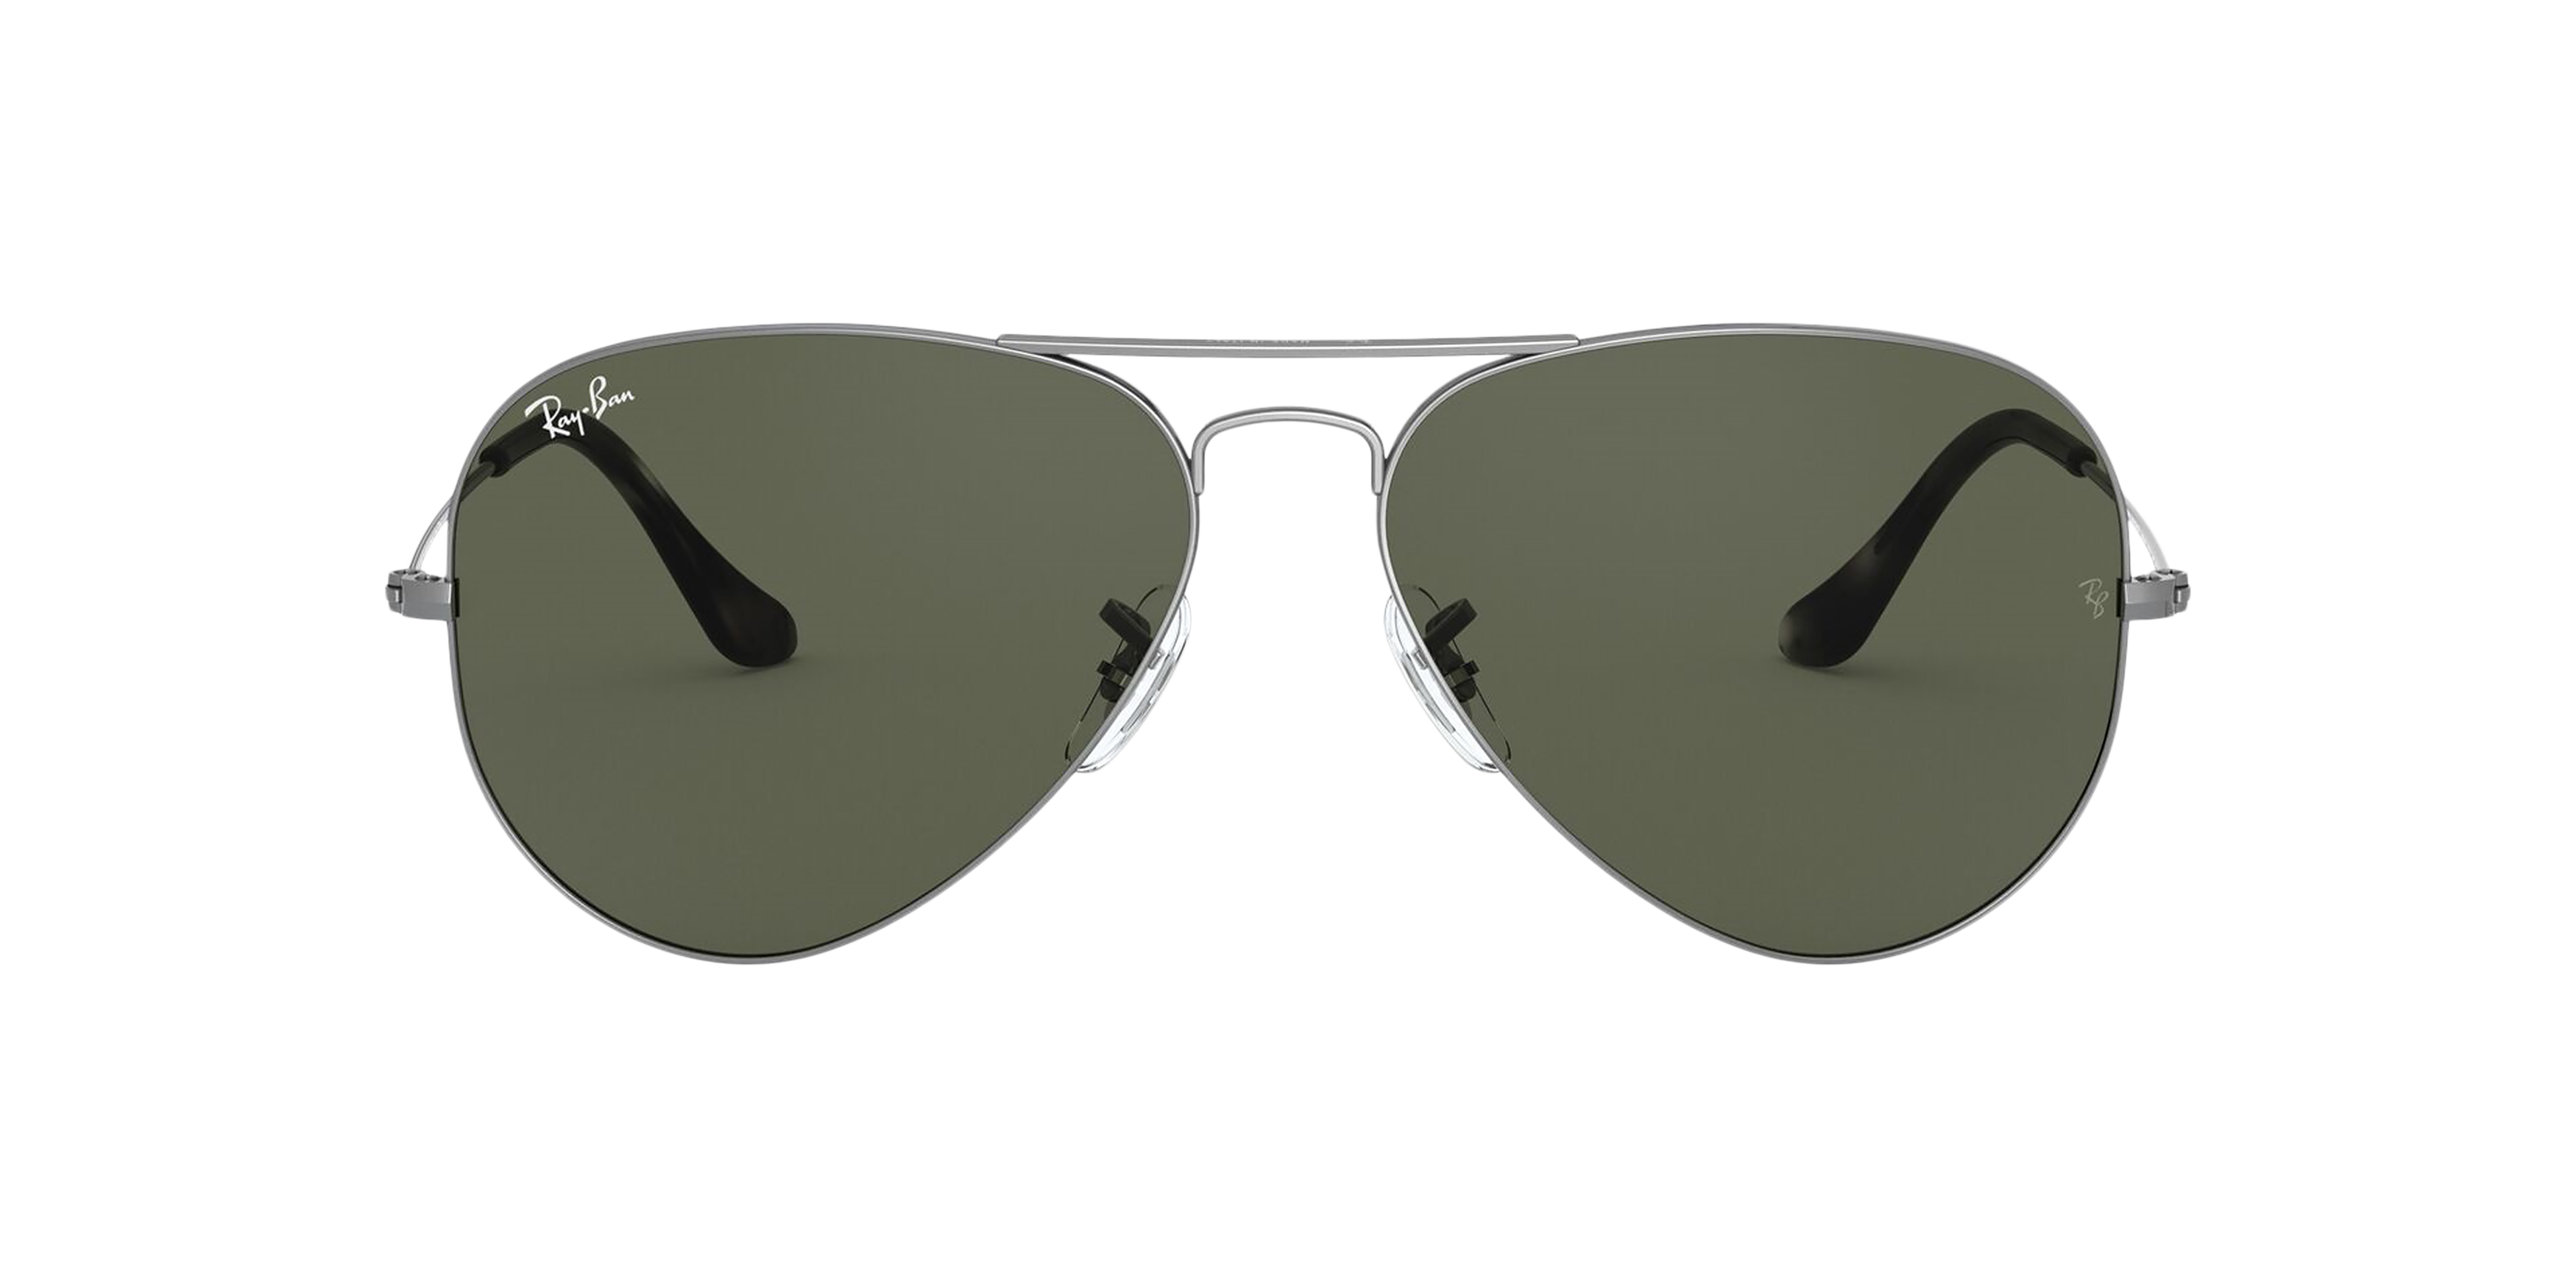 Ray-Ban Classic RB3025 1/57 zonnebril | Pearle Opticiens